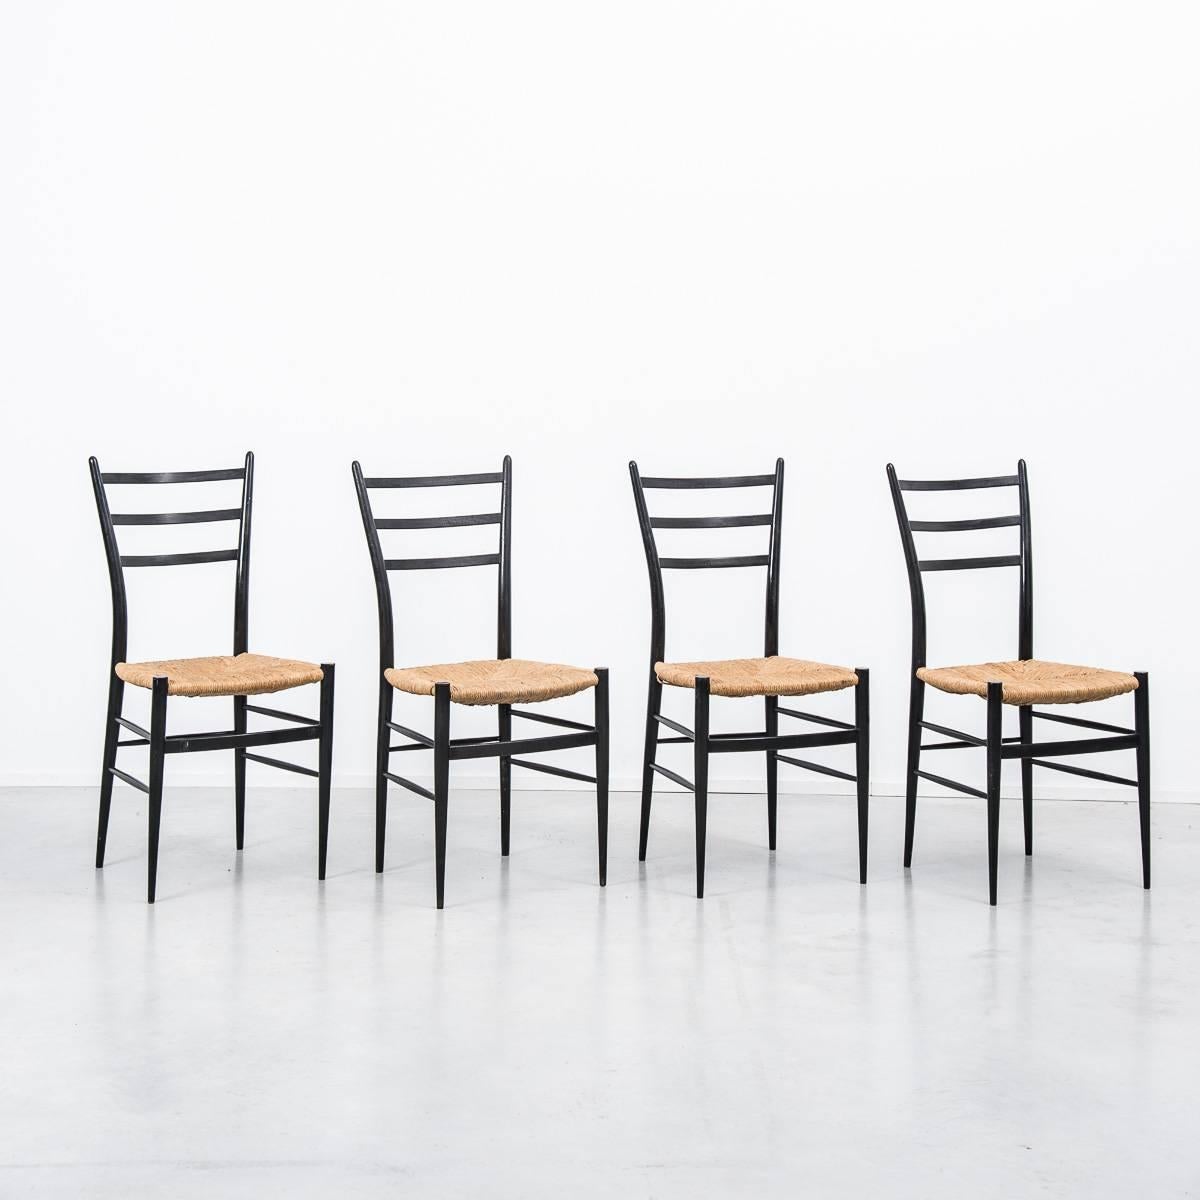 This set of elegant Spinetto chairs have a very thin profile with black ebonised frames and wicker seats, manufactured in the 1950s by Chiavari, Italy. These chairs were the inspiration for Gio Ponti’s famous Superleggera chair. 

          